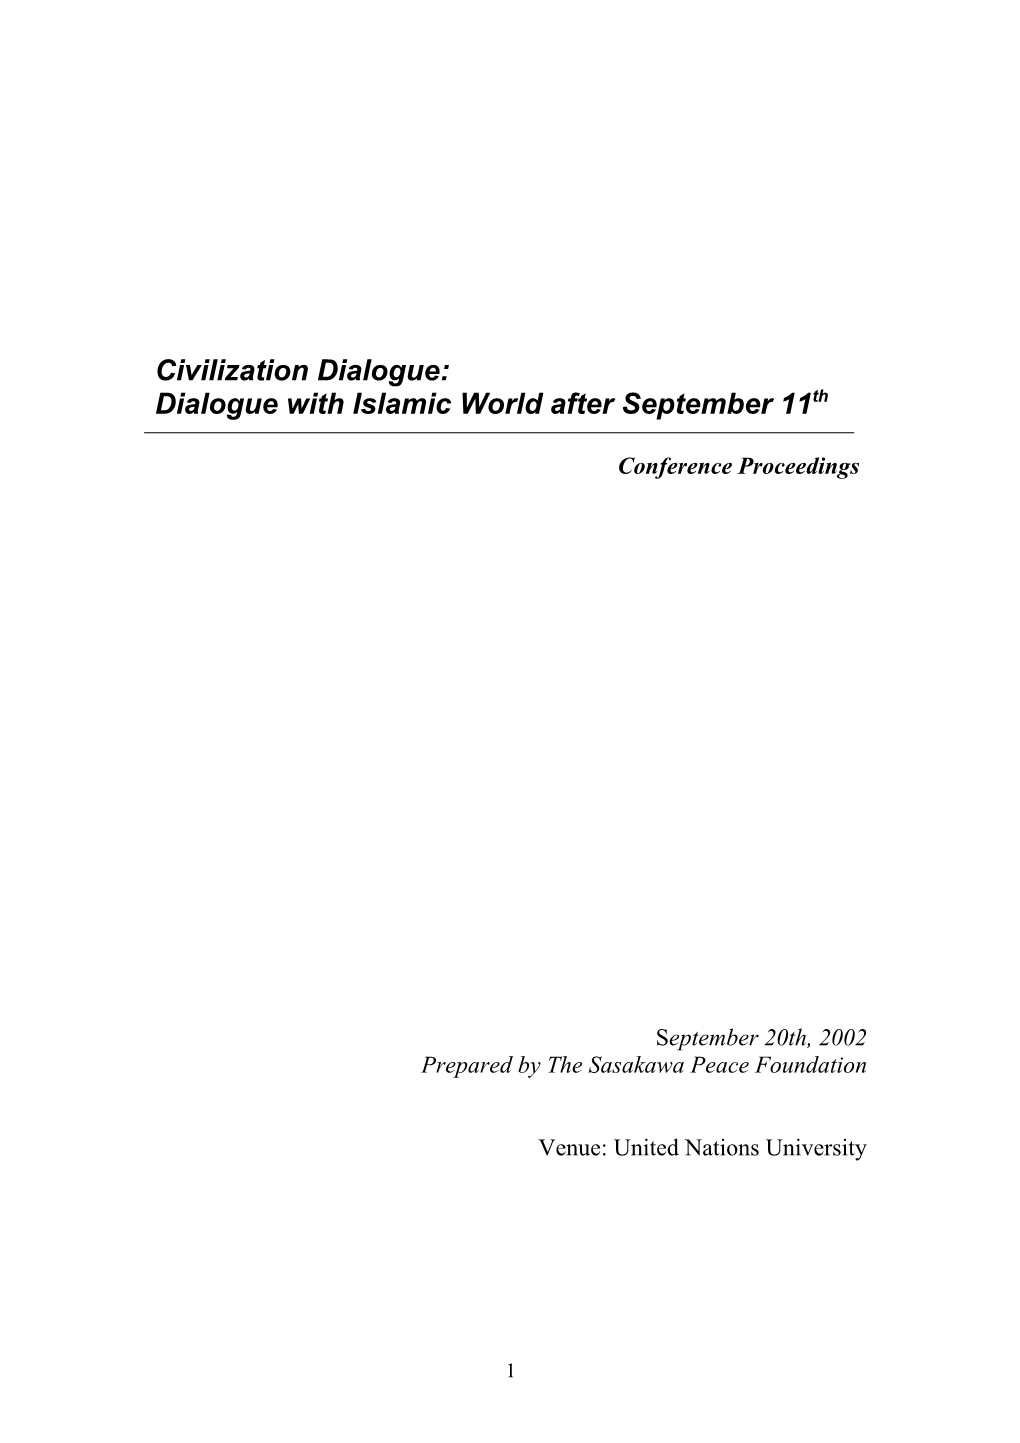 Civilization Dialogue: Dialogue with Islamic World After September 11Th